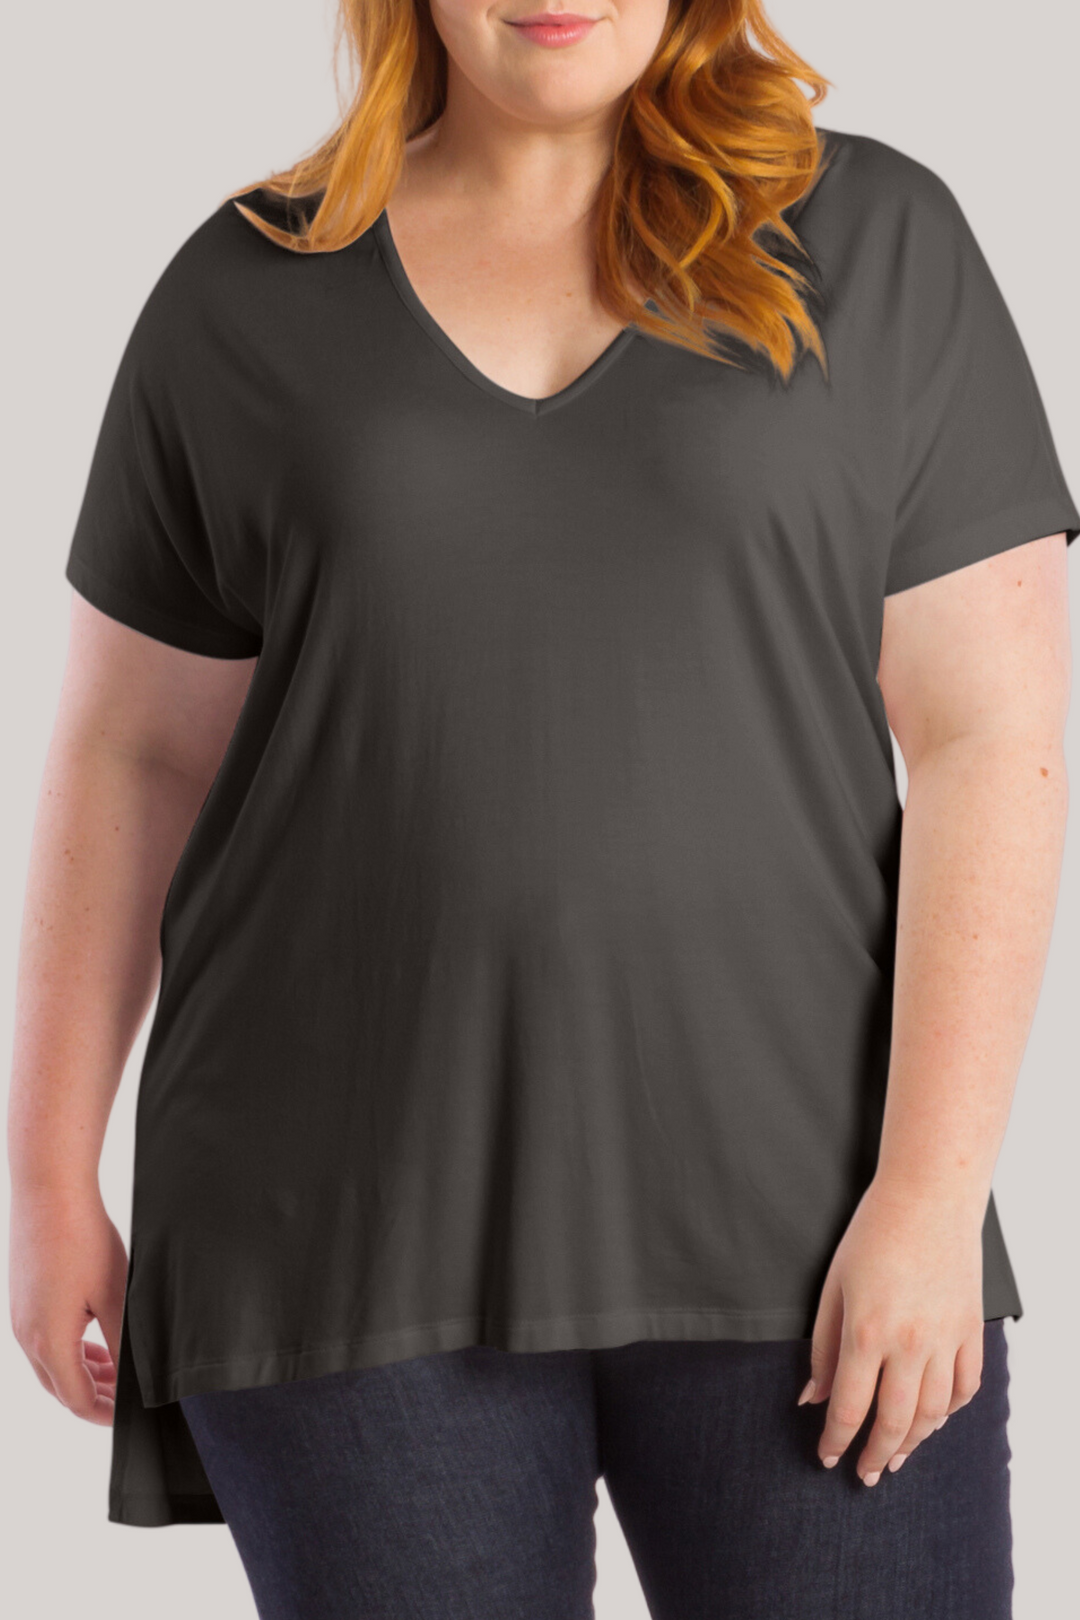 Right By Your Side Oversized Tee - Khaki - ONLY ONE XL (24-26)